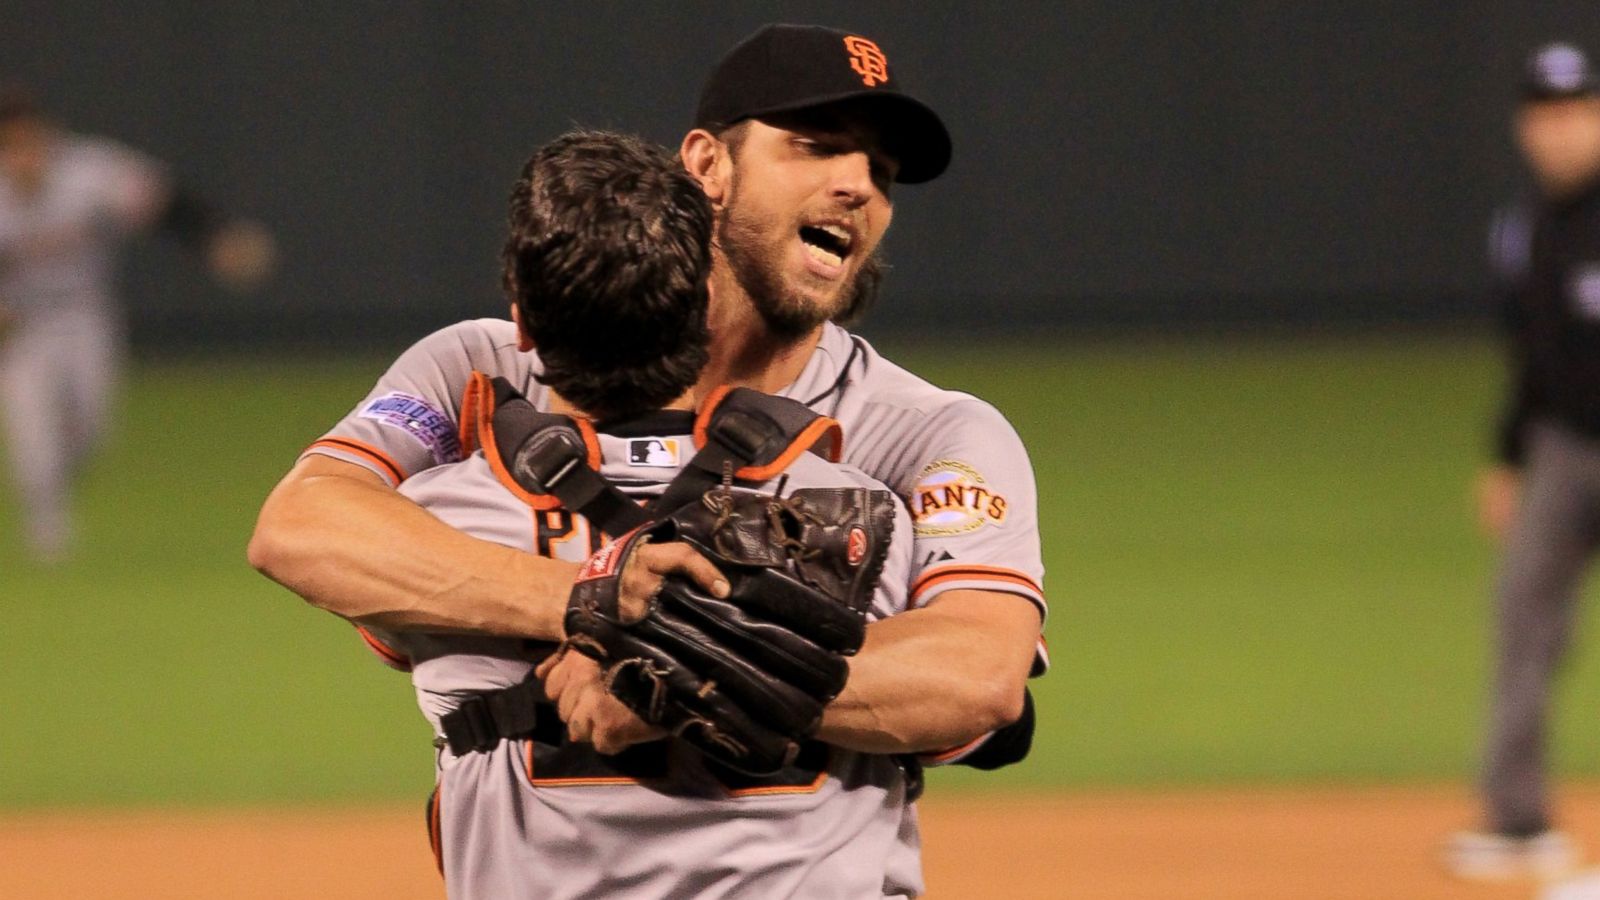 Madison Bumgarner is in the best shape of his life - NBC Sports